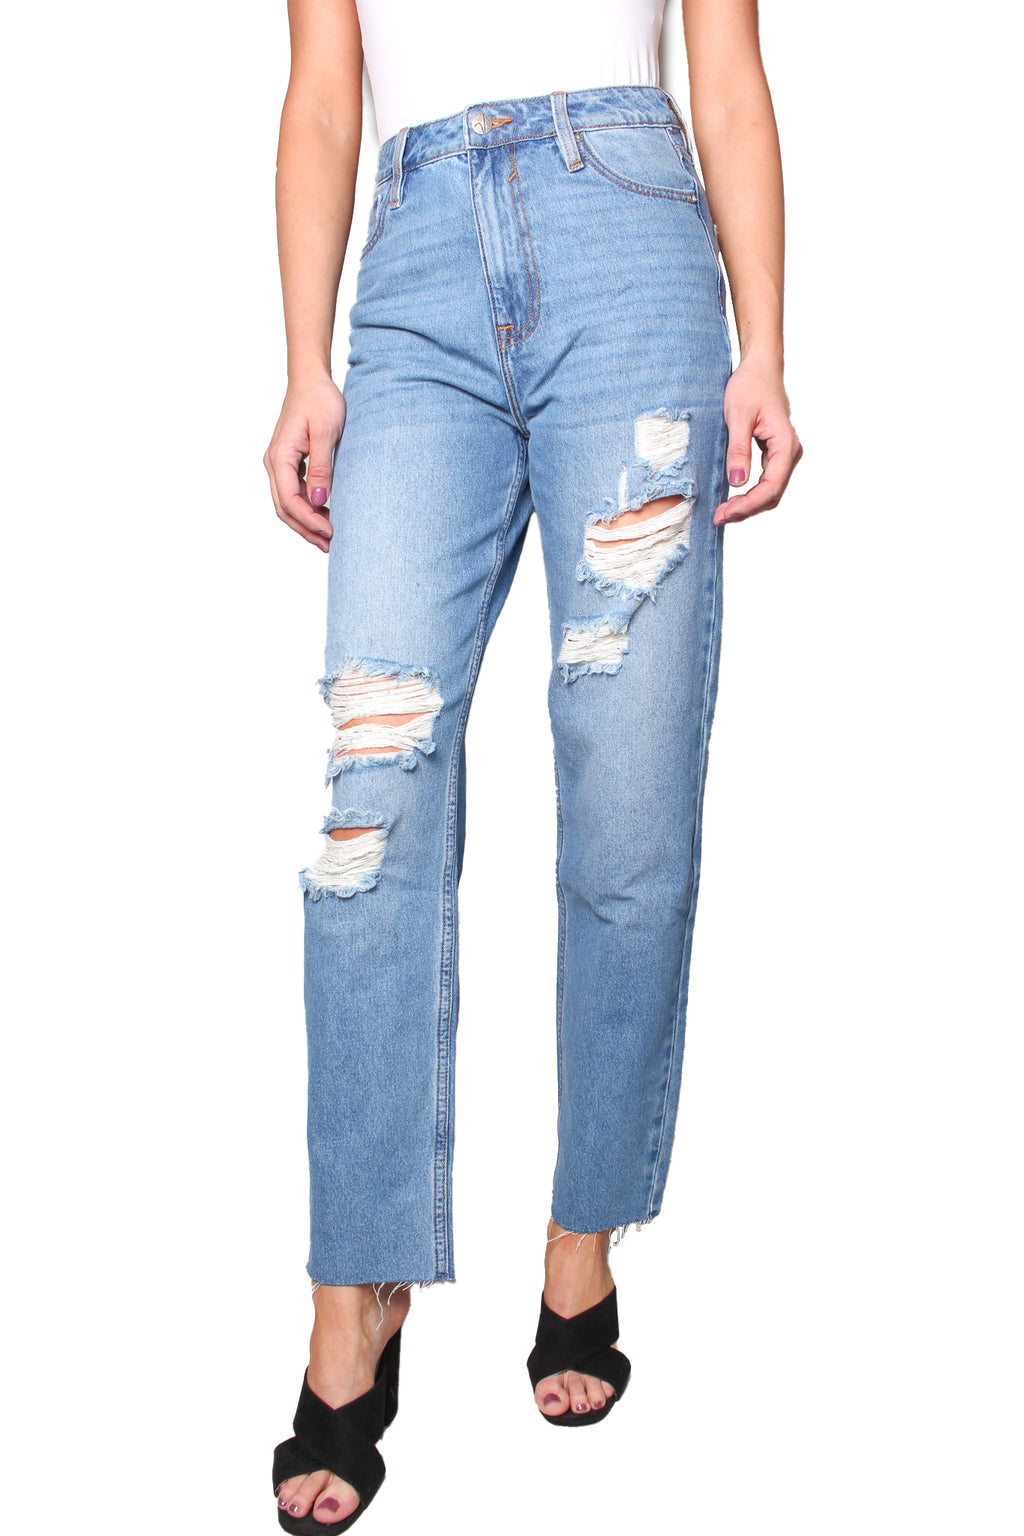 Women's High Waisted Tattered Frayed Jeans